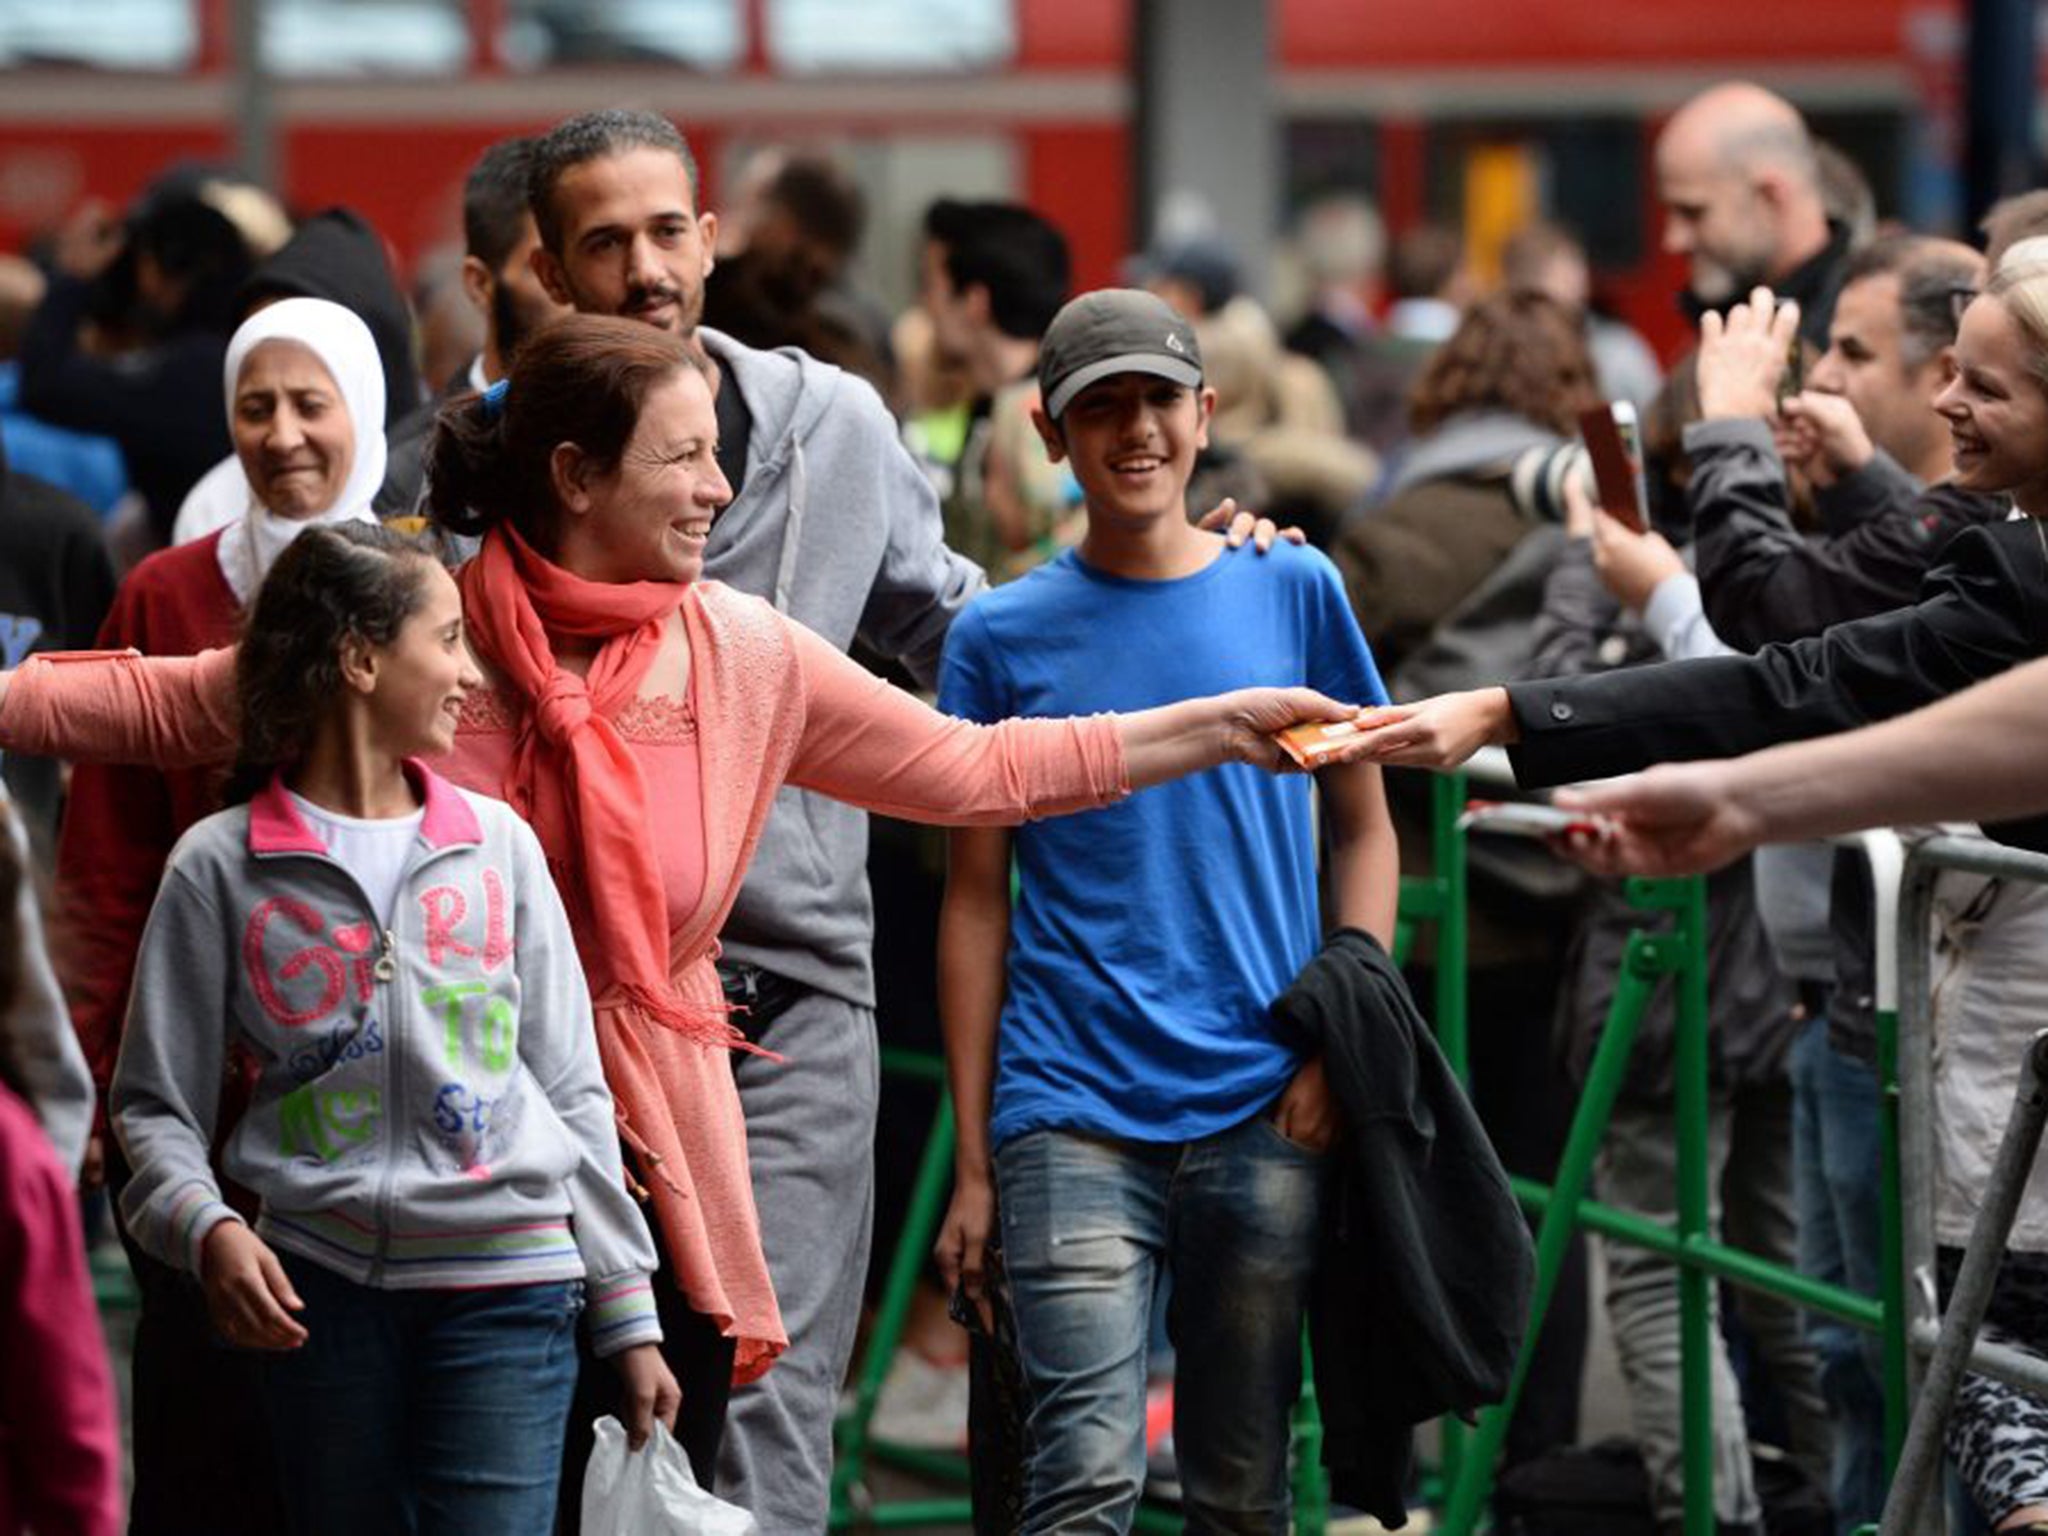 Refugees arrive at the central railway station in Munich, welcomed with open arms